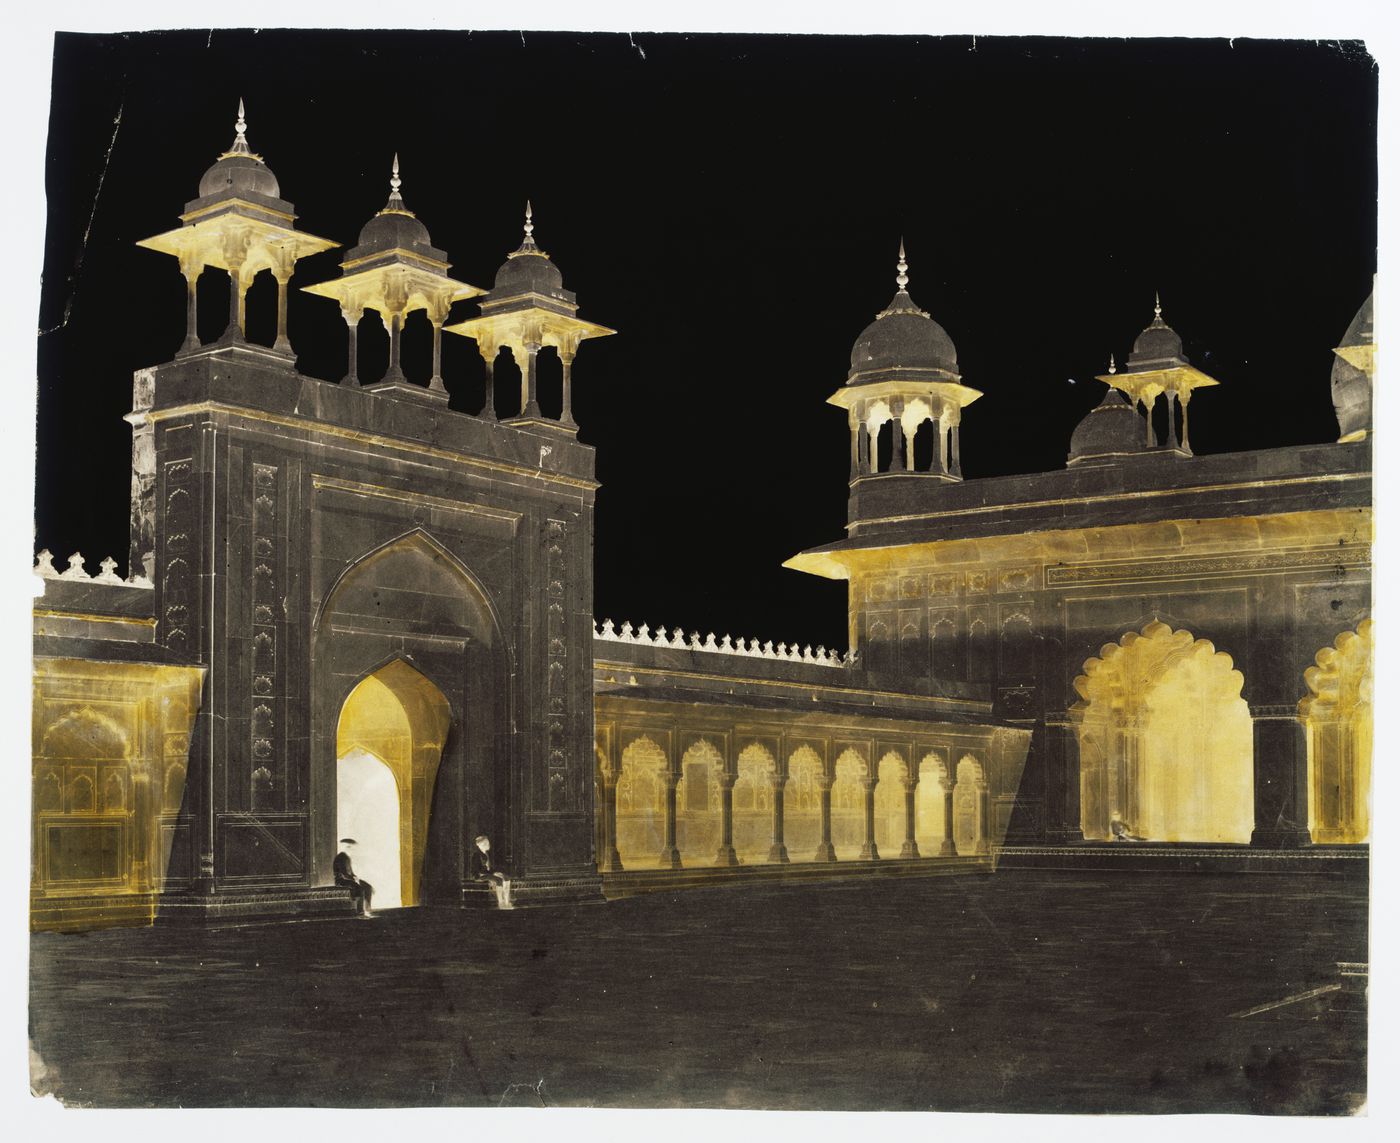 Partial view of the Moti Masjid [Pearl Mosque] showing part of the façade and the portal, Agra, India